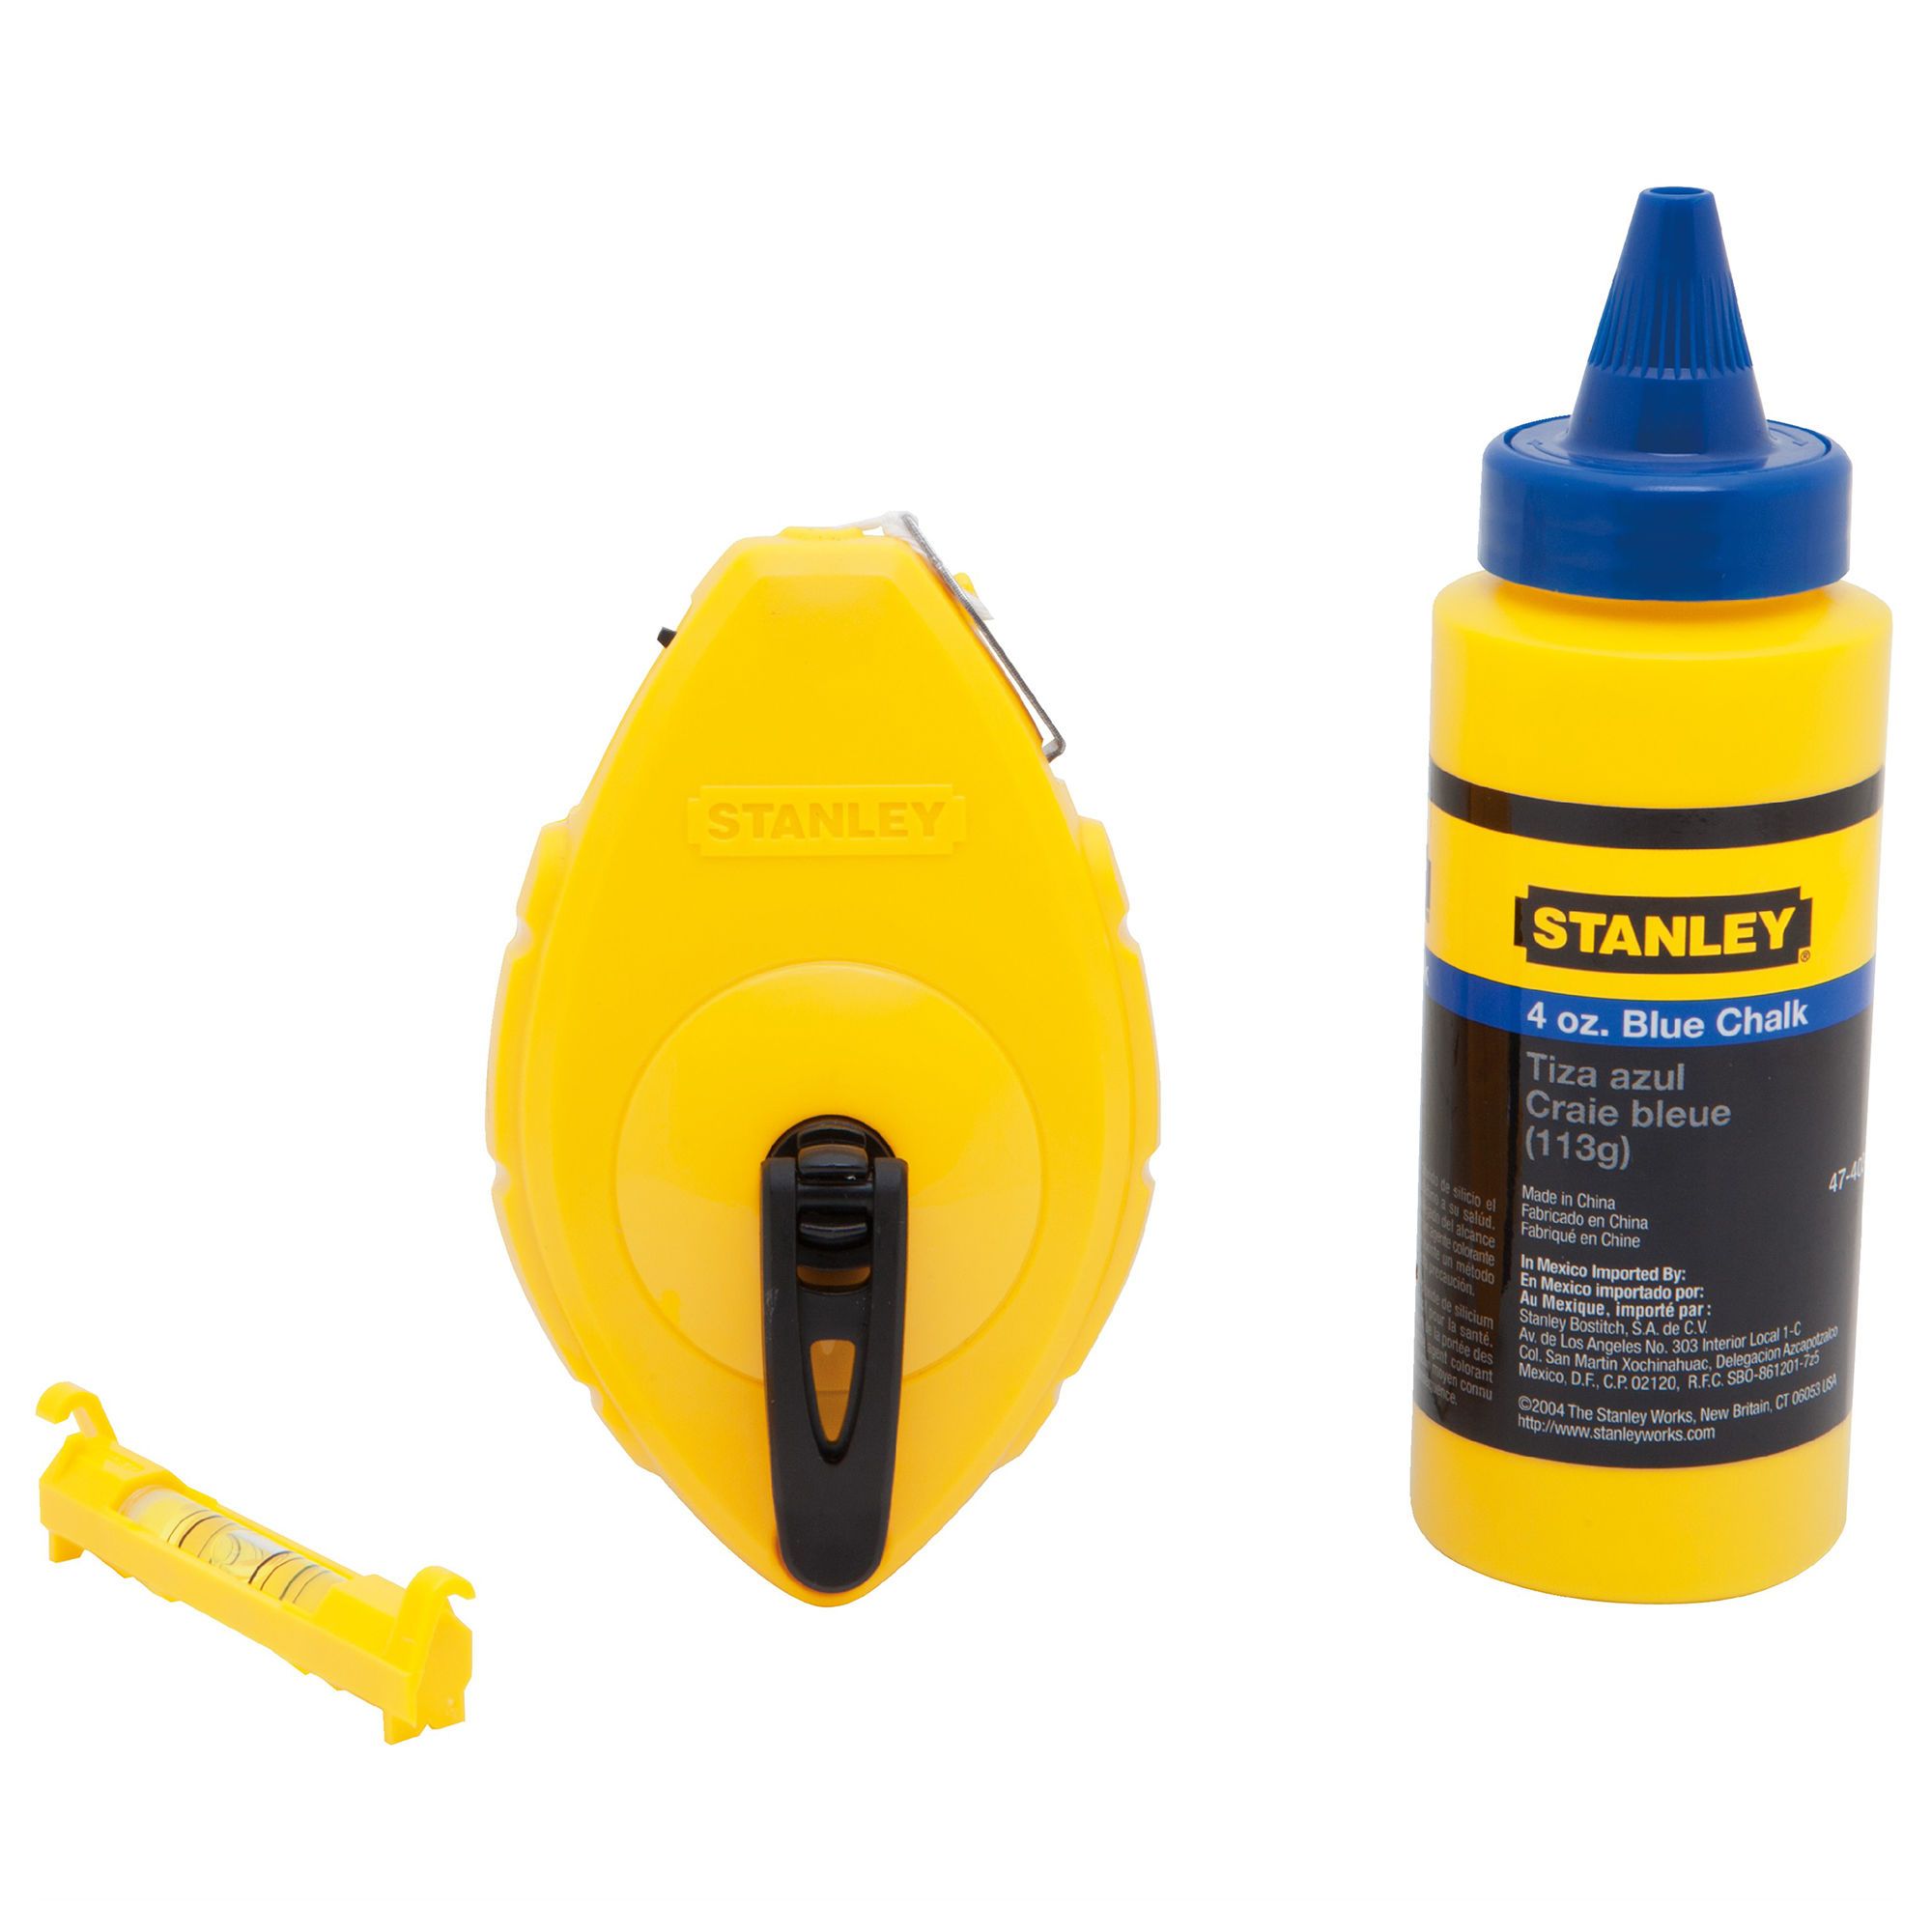 KROST Plastic Chalk Line Reel Set 50'/15Metre with 115G Blue Chalk and  Plastic Line Level (Yellow)